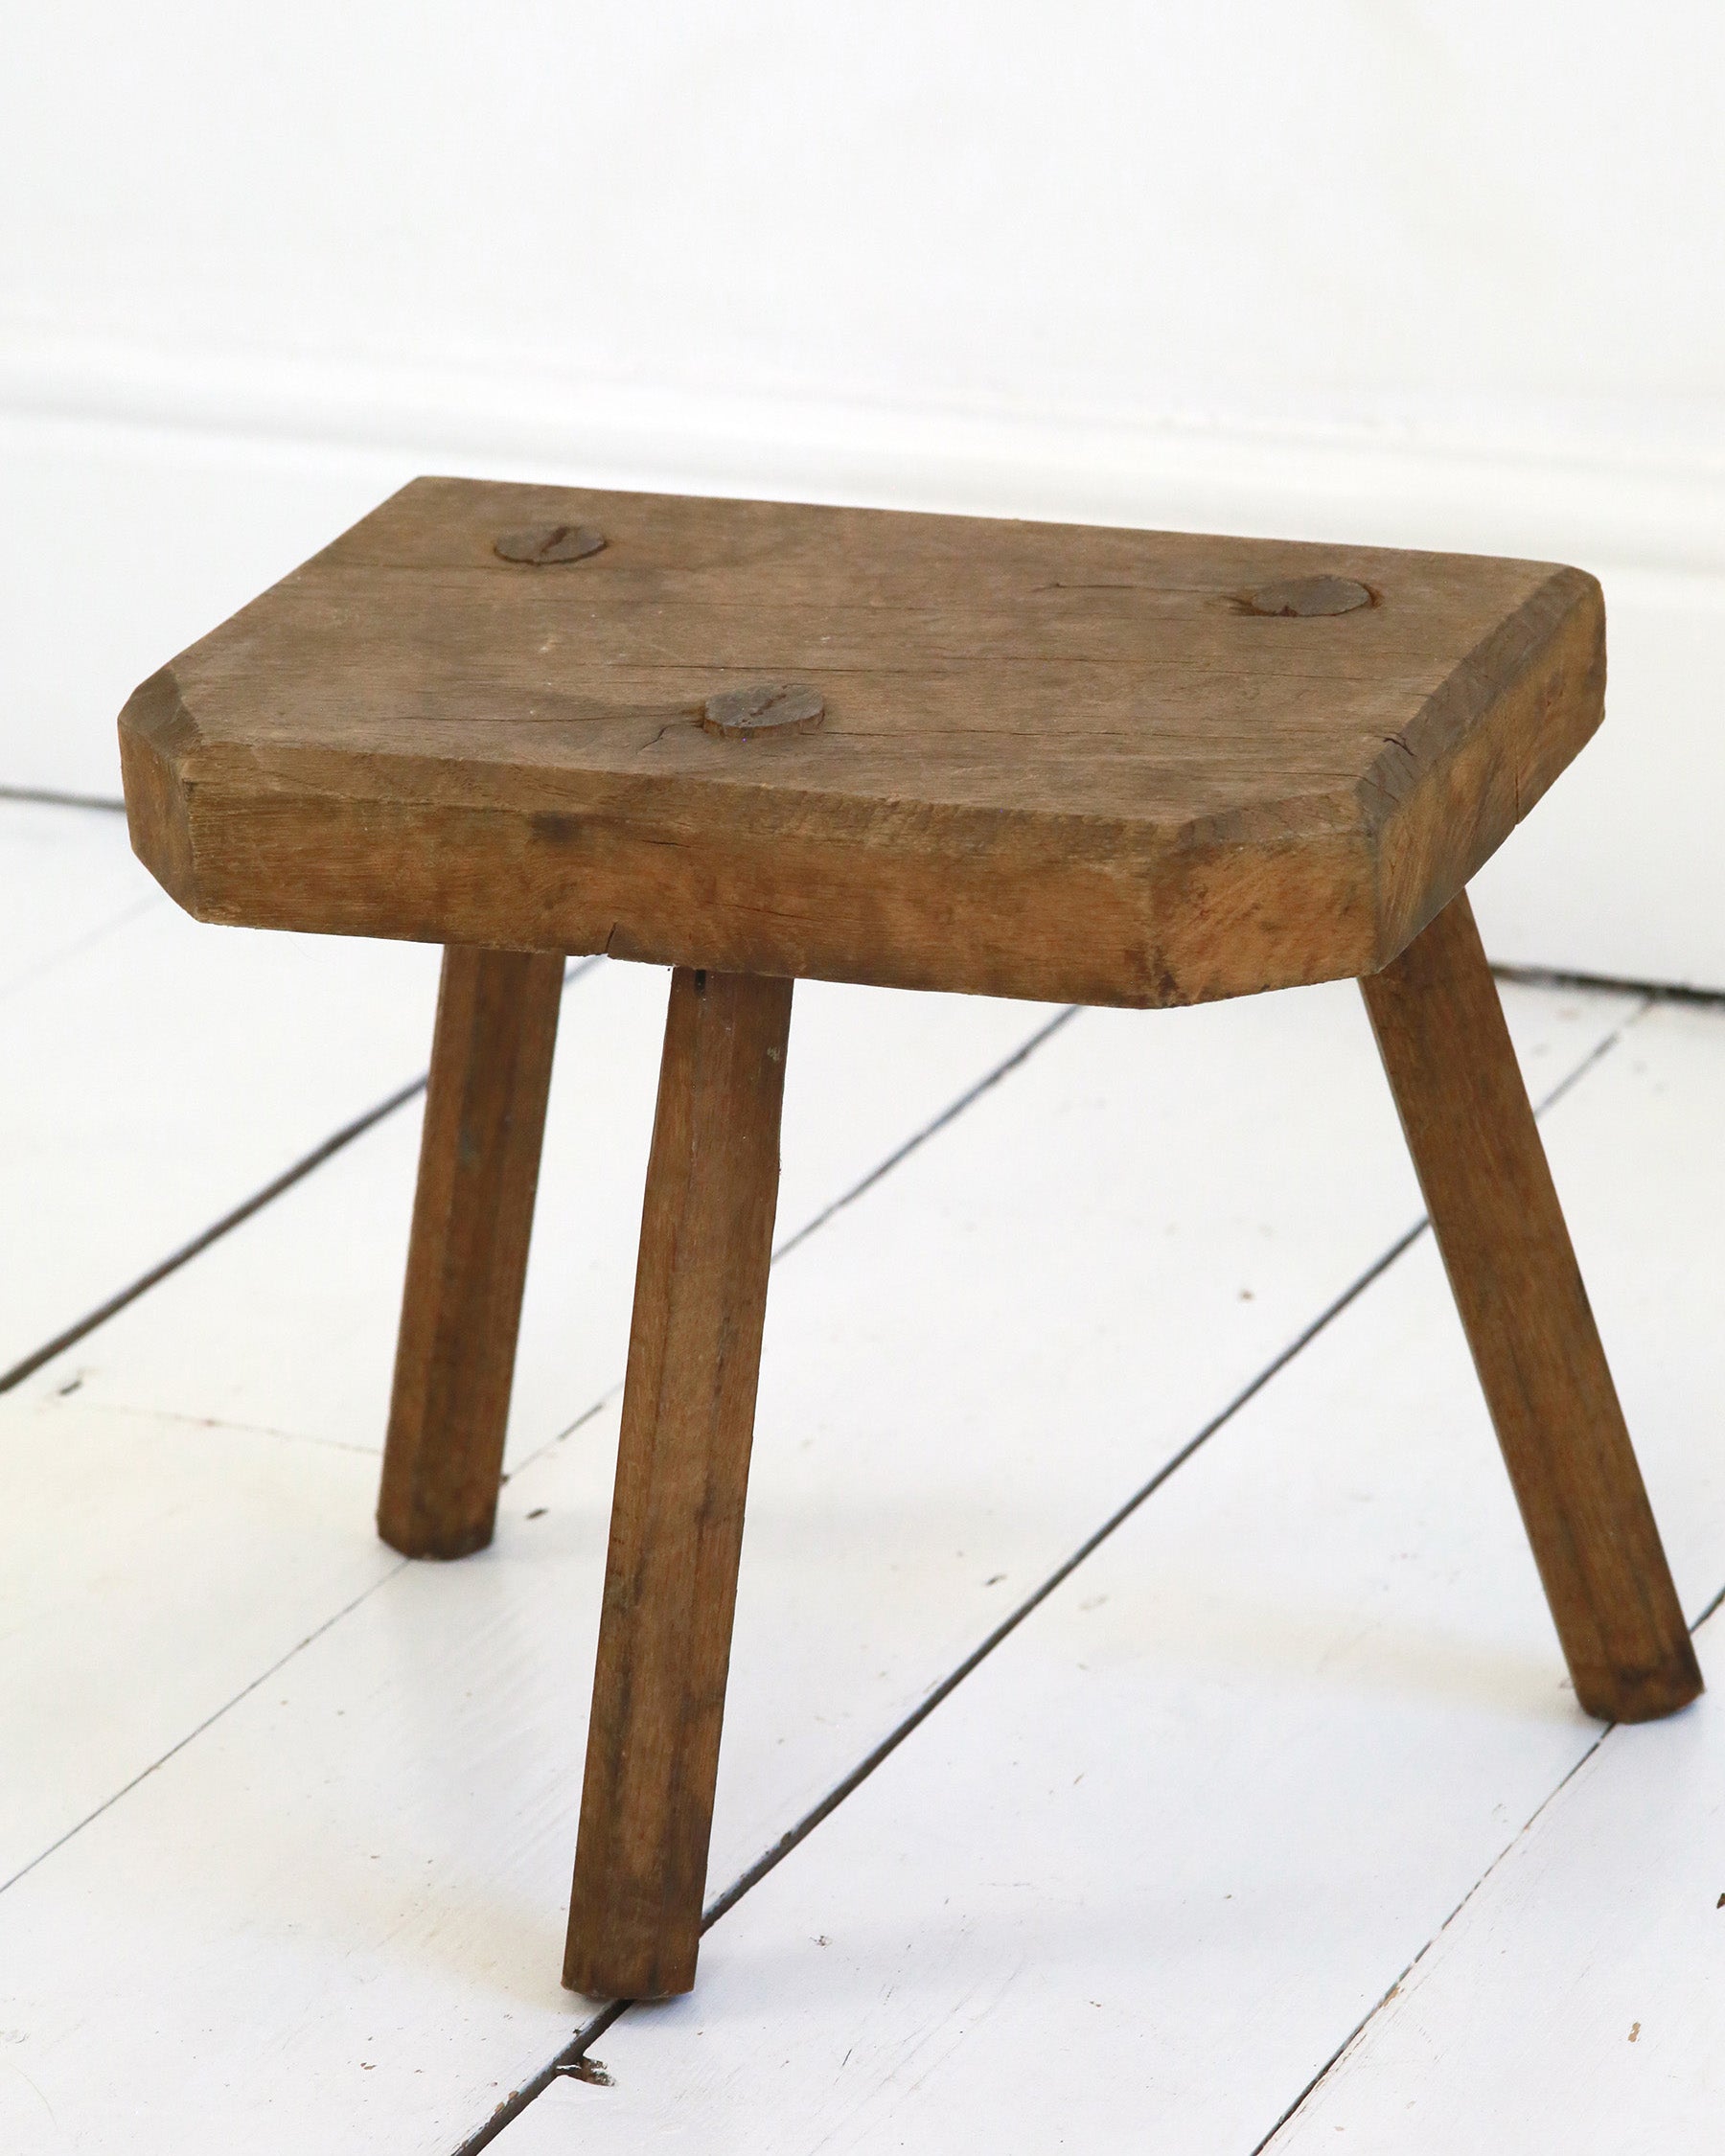 Vintage Wooden Milking Stool with 3 legs